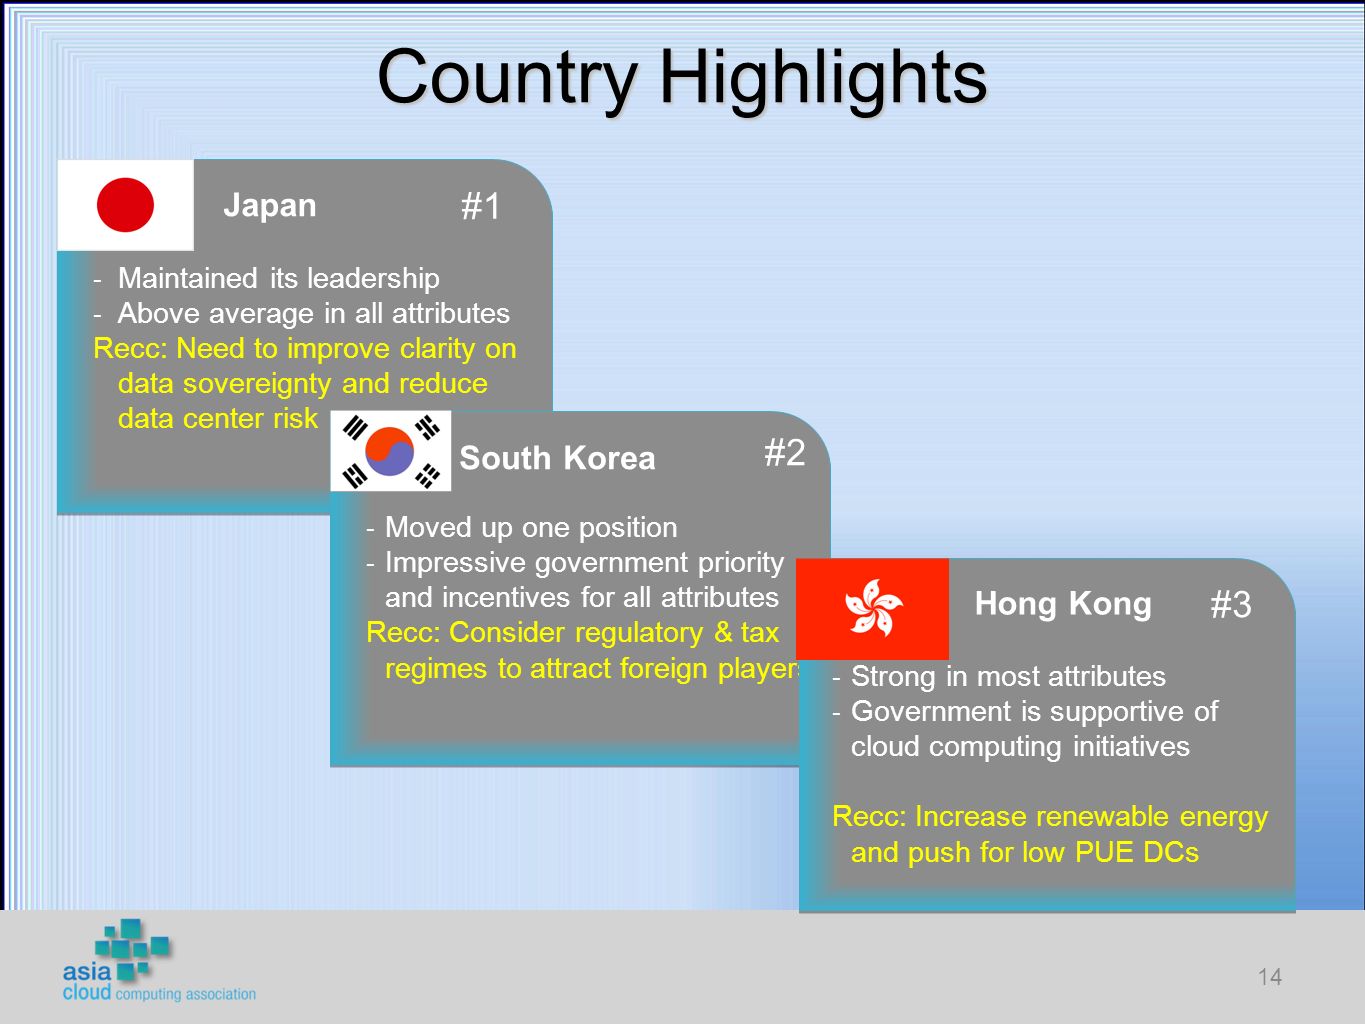 Country Highlights 14 Japan #1 - Maintained its leadership - Above average in all attributes Recc: Need to improve clarity on data sovereignty and reduce data center risk South Korea - Moved up one position - Impressive government priority and incentives for all attributes Recc: Consider regulatory & tax regimes to attract foreign players #2 Hong Kong #3 - Strong in most attributes - Government is supportive of cloud computing initiatives Recc: Increase renewable energy and push for low PUE DCs